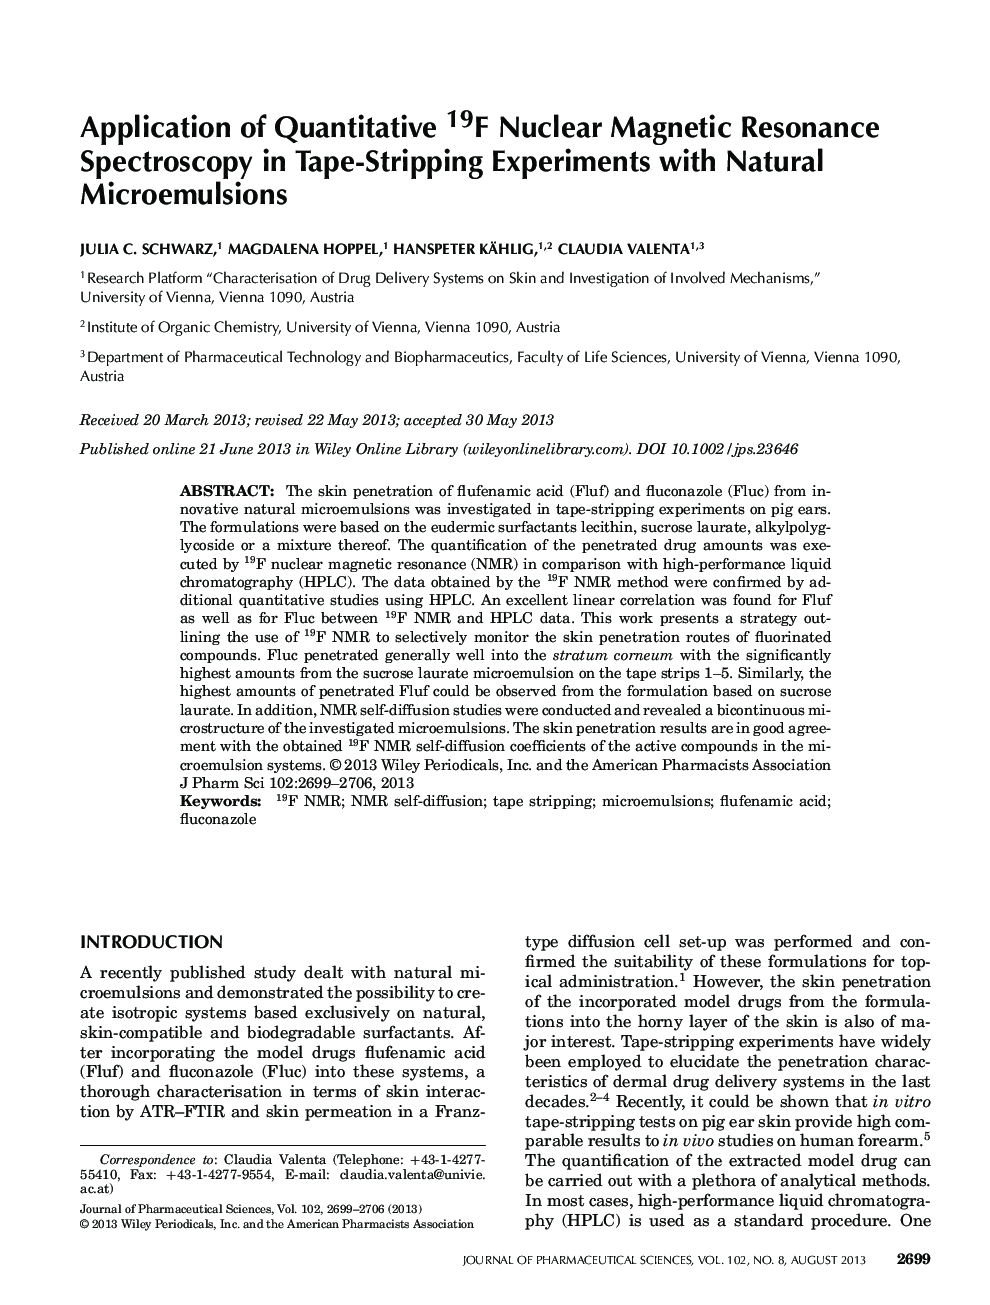 Application of Quantitative 19F Nuclear Magnetic Resonance Spectroscopy in Tape-Stripping Experiments with Natural Microemulsions